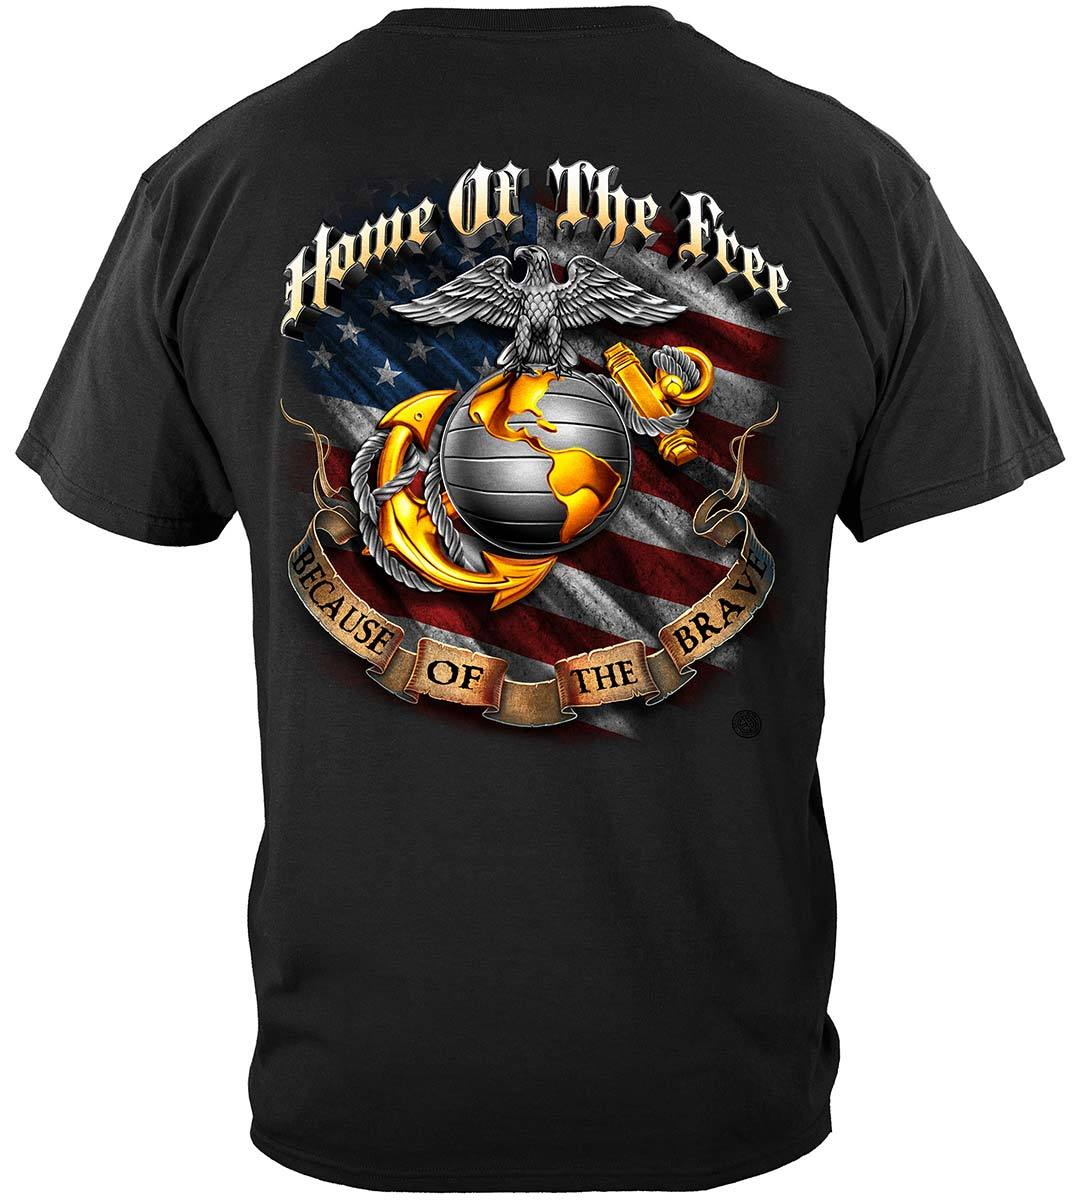 USMC Home Of The Free Because Of The Brave USMC Premium Hooded Sweat Shirt